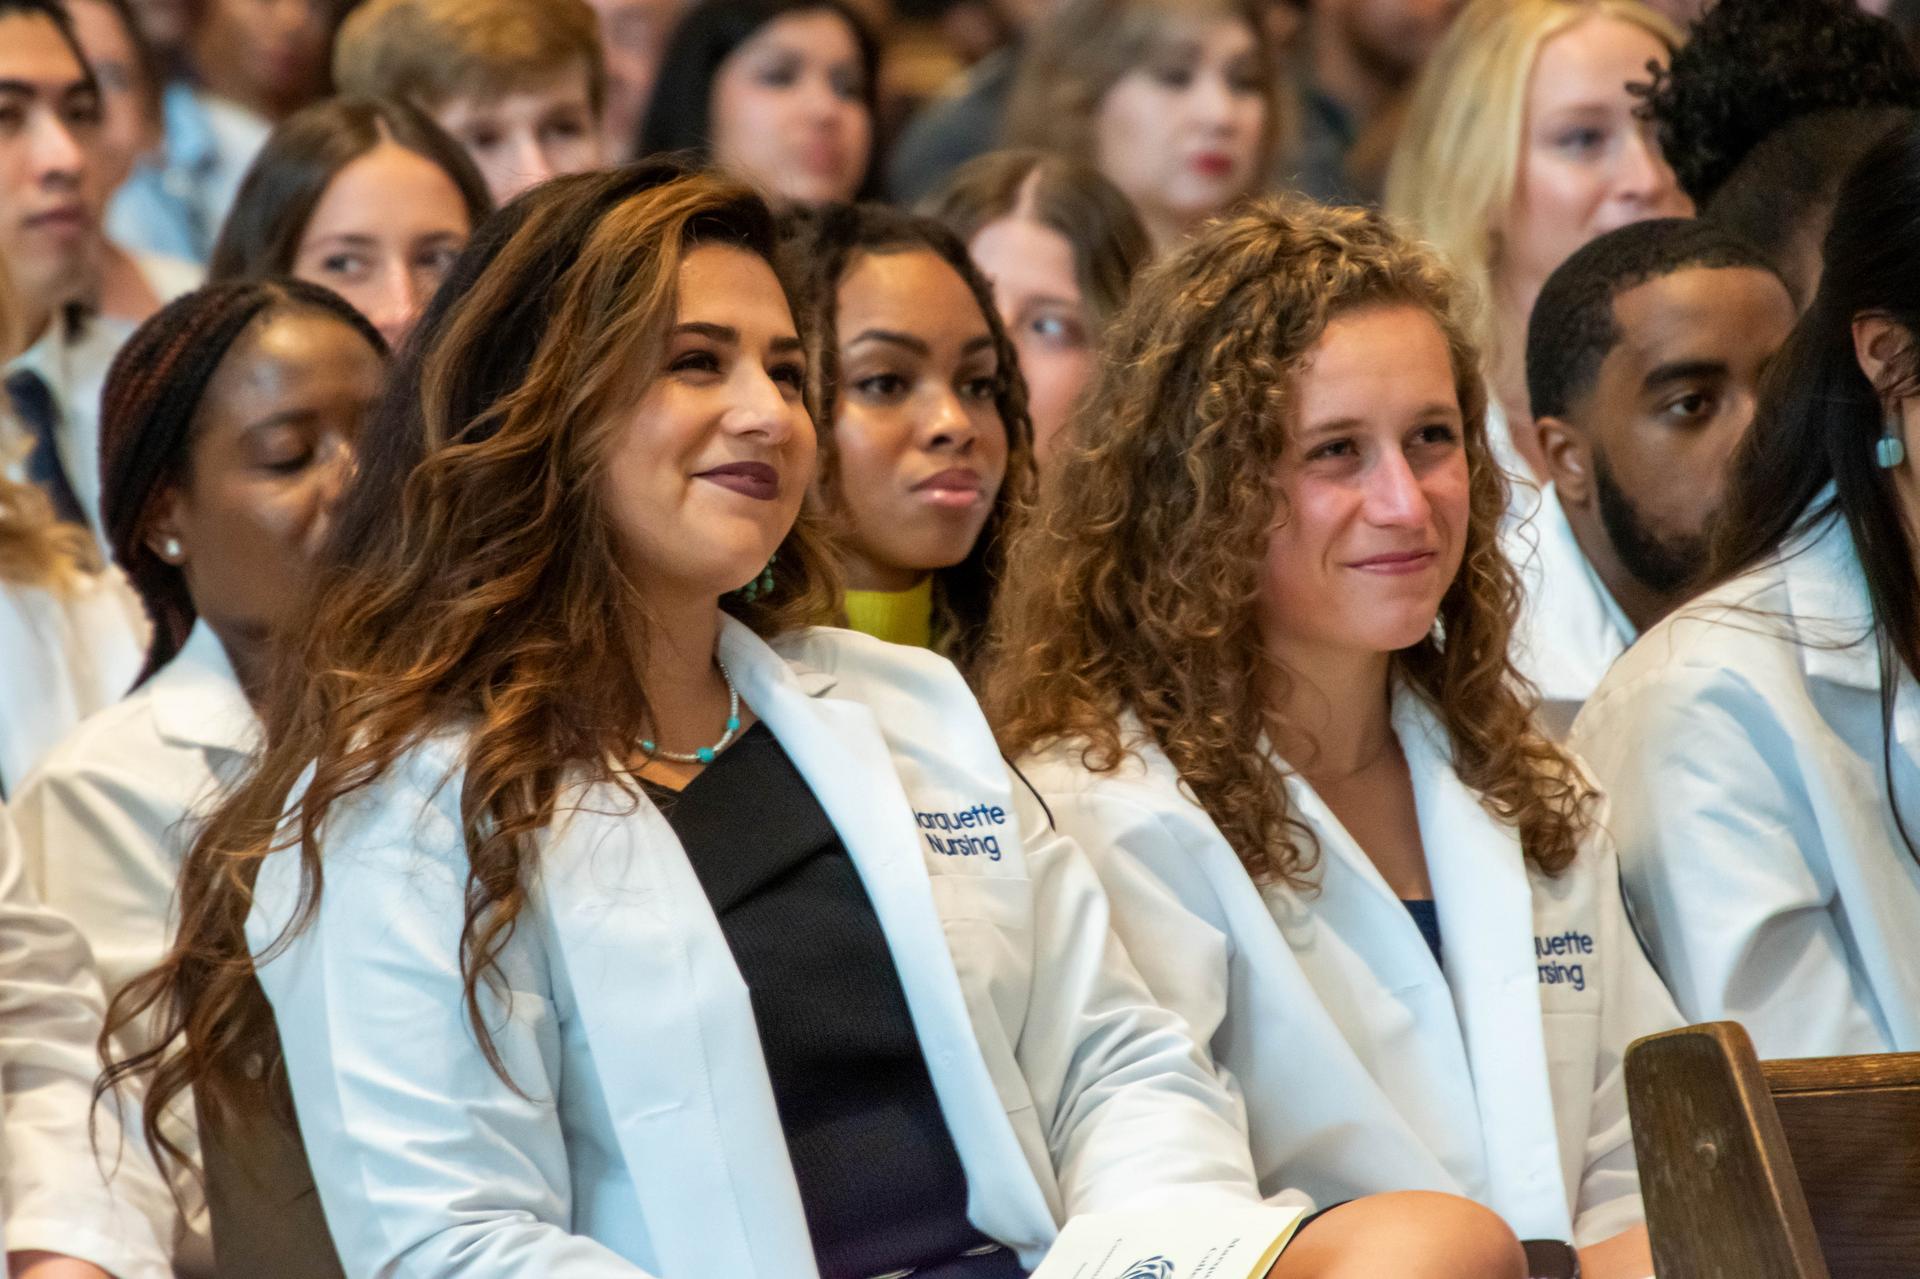 Marquette named best nursing college in Wisconsin in student choice awards